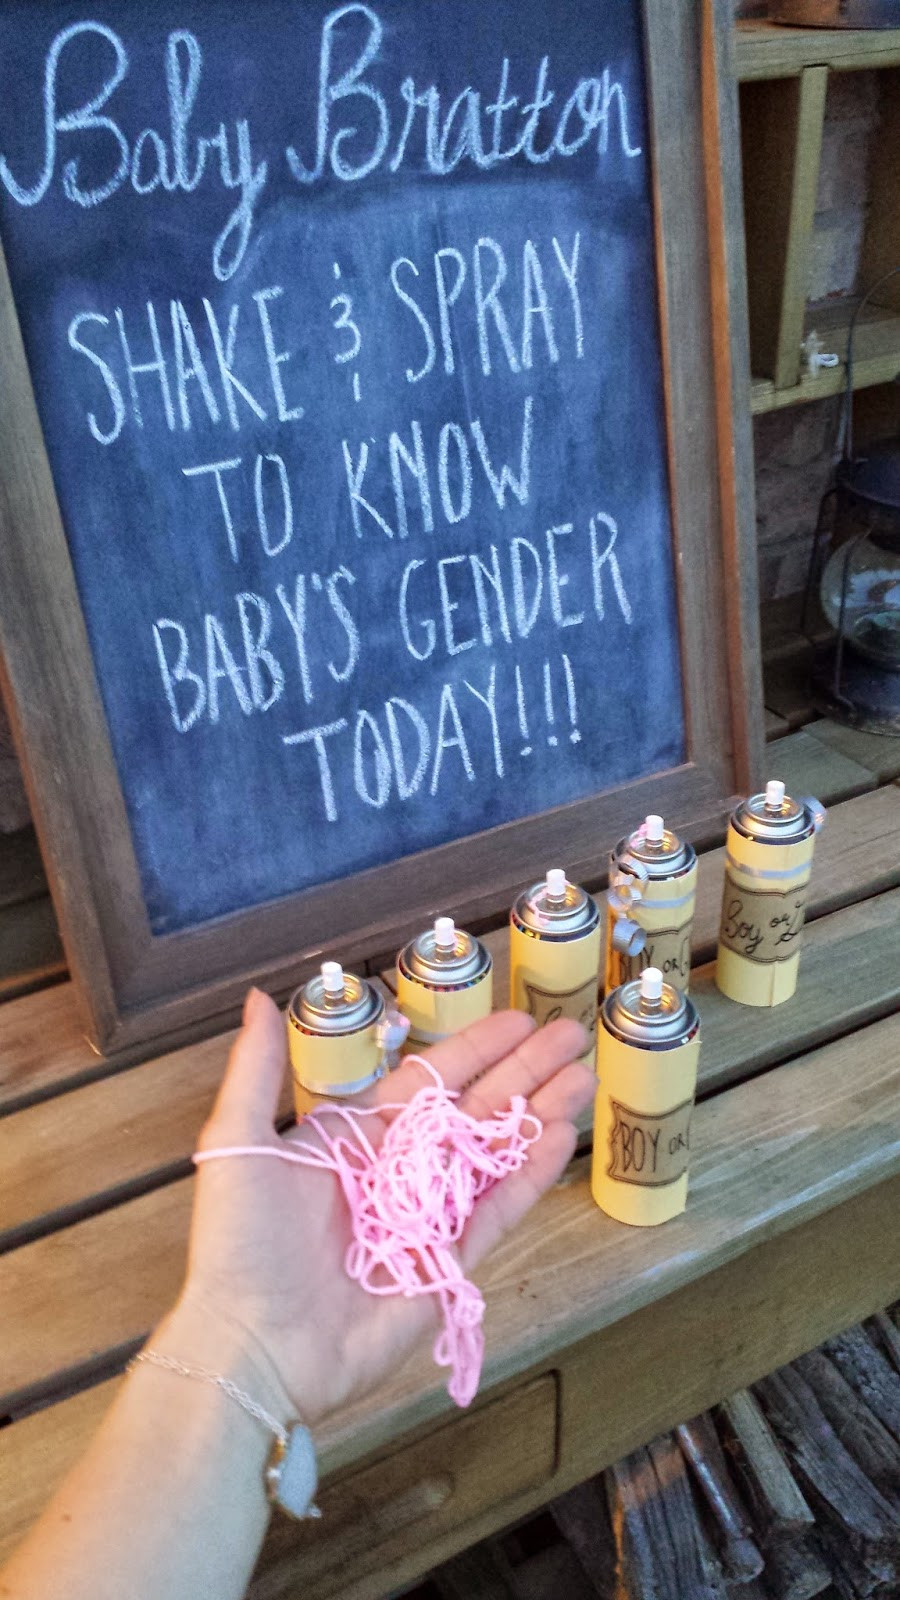 Cute Ideas For A Gender Reveal Party
 Lively Happenings Our Creative Gender Reveal with Silly